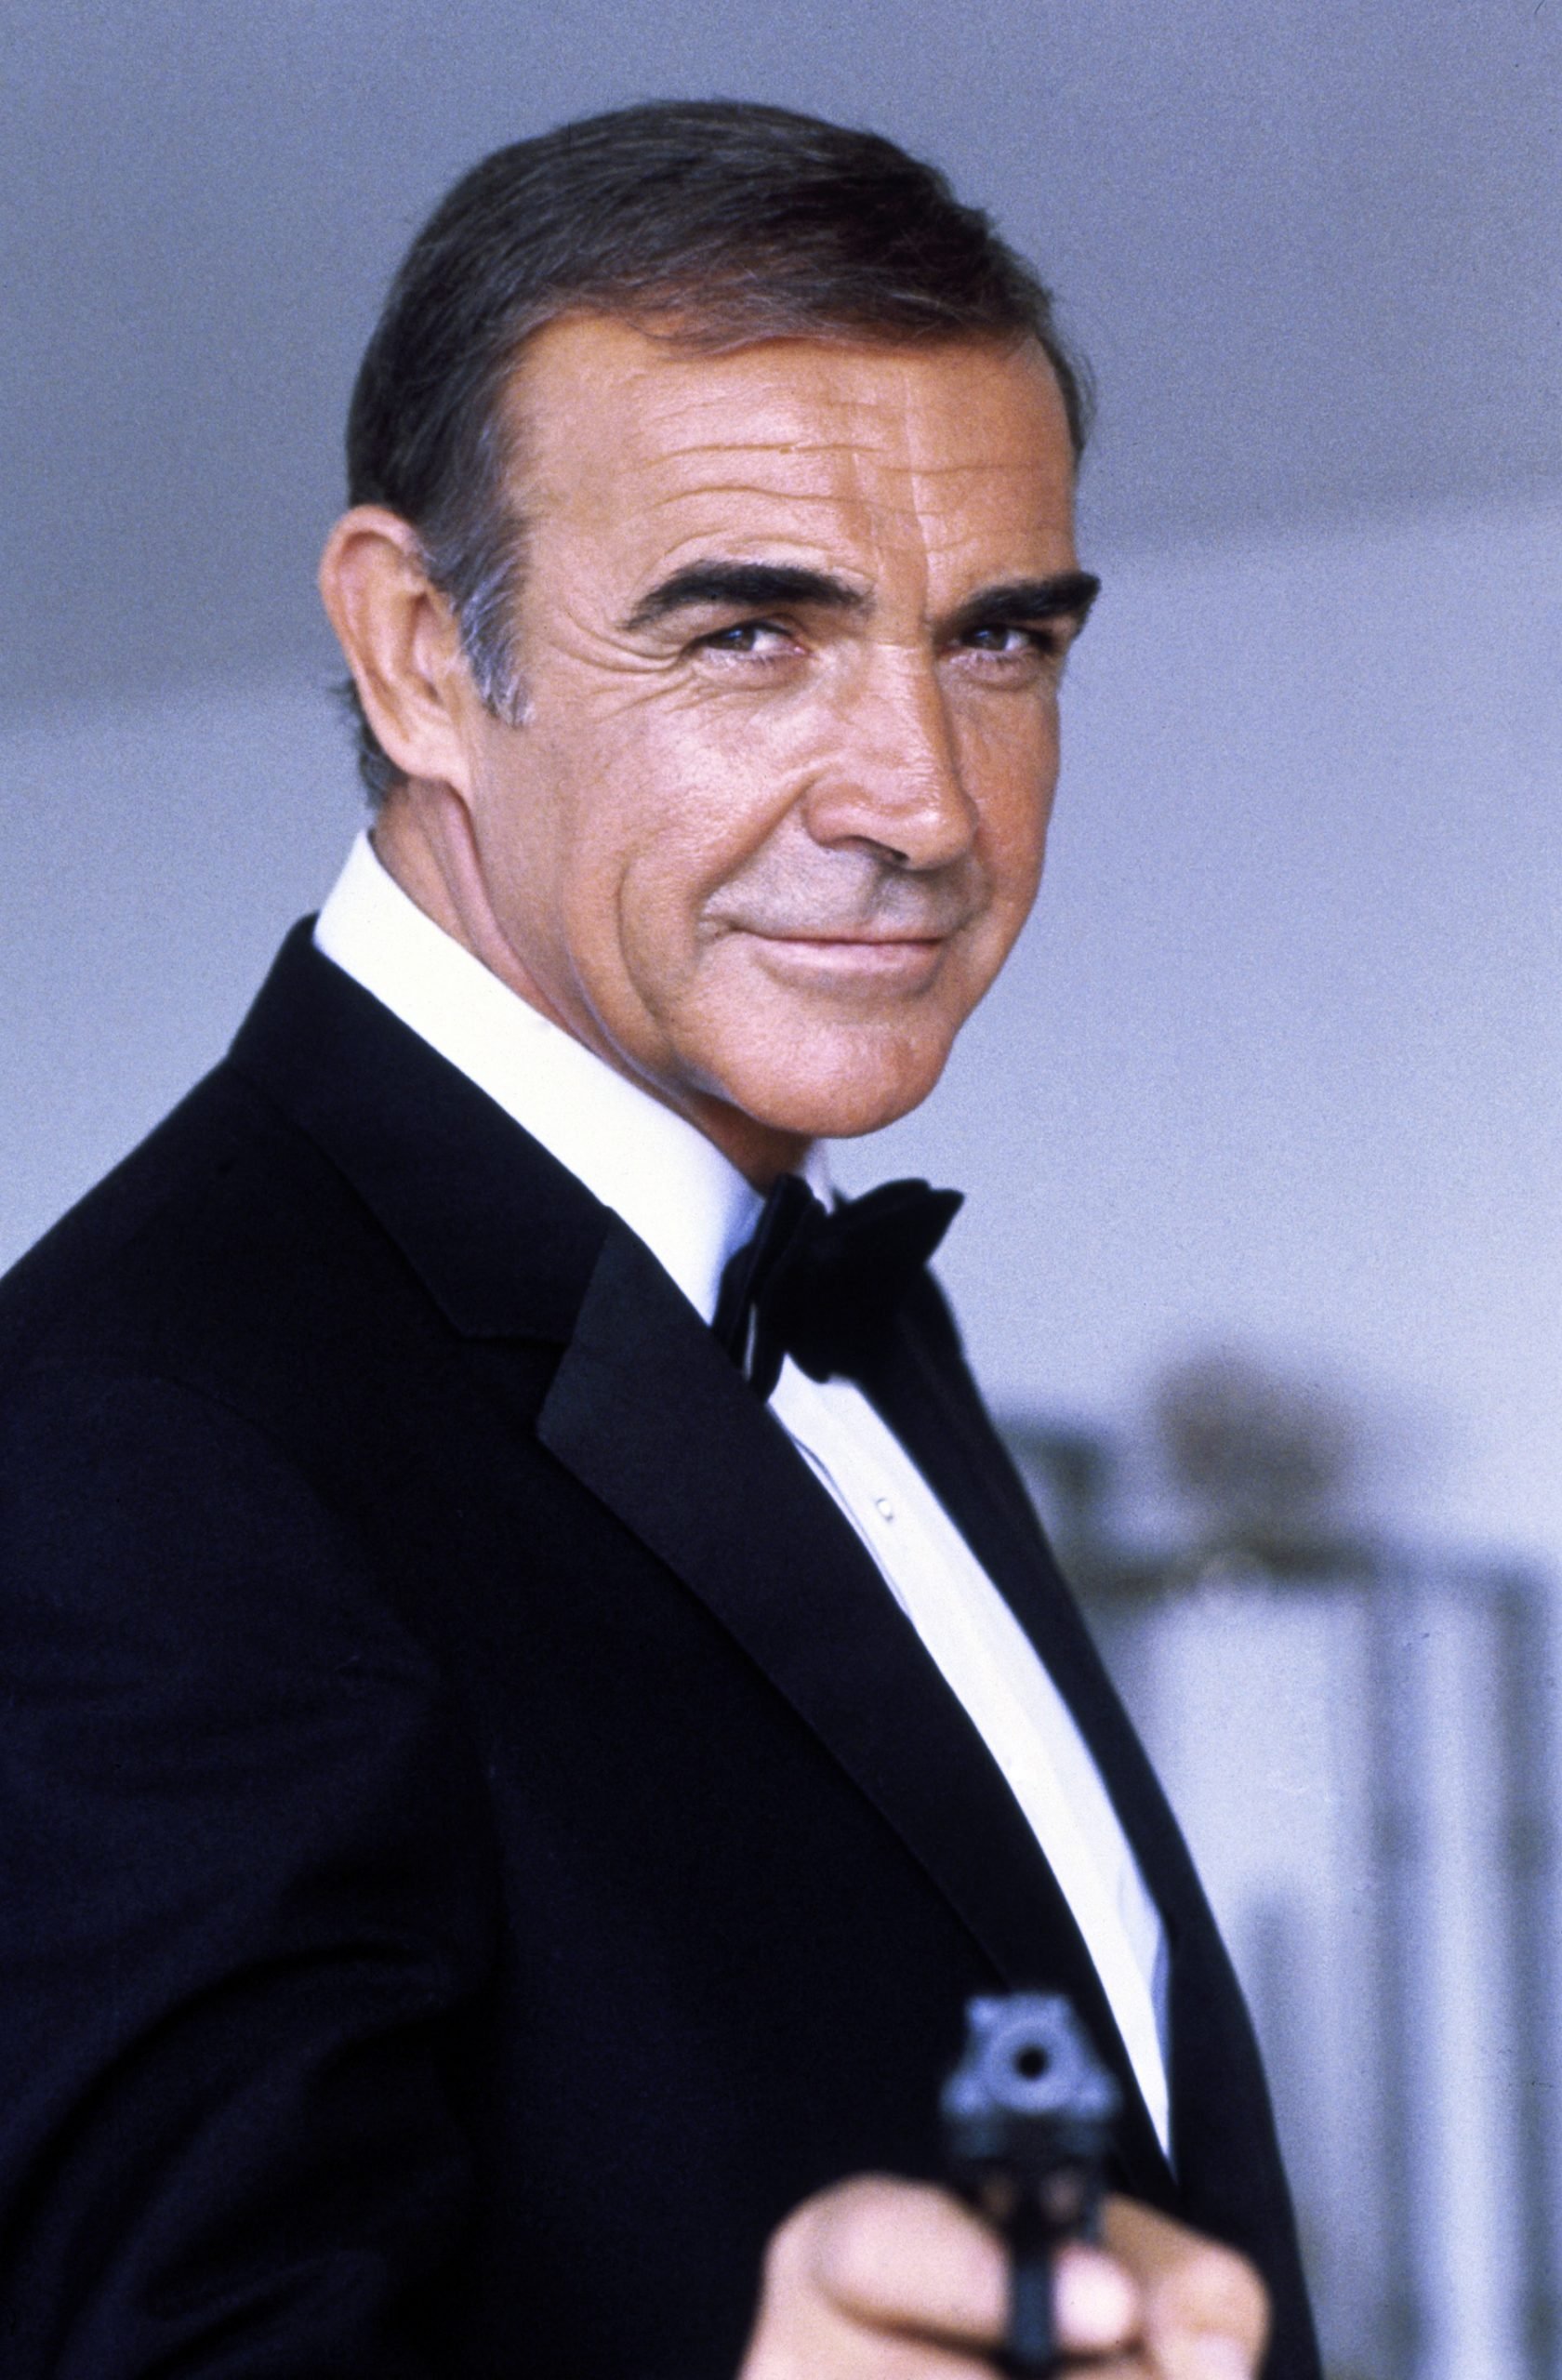 NEVER SAY NEVER AGAIN, Sean Connery, 1983. (c) Warner Brothers/ Courtesy: Everett Collection